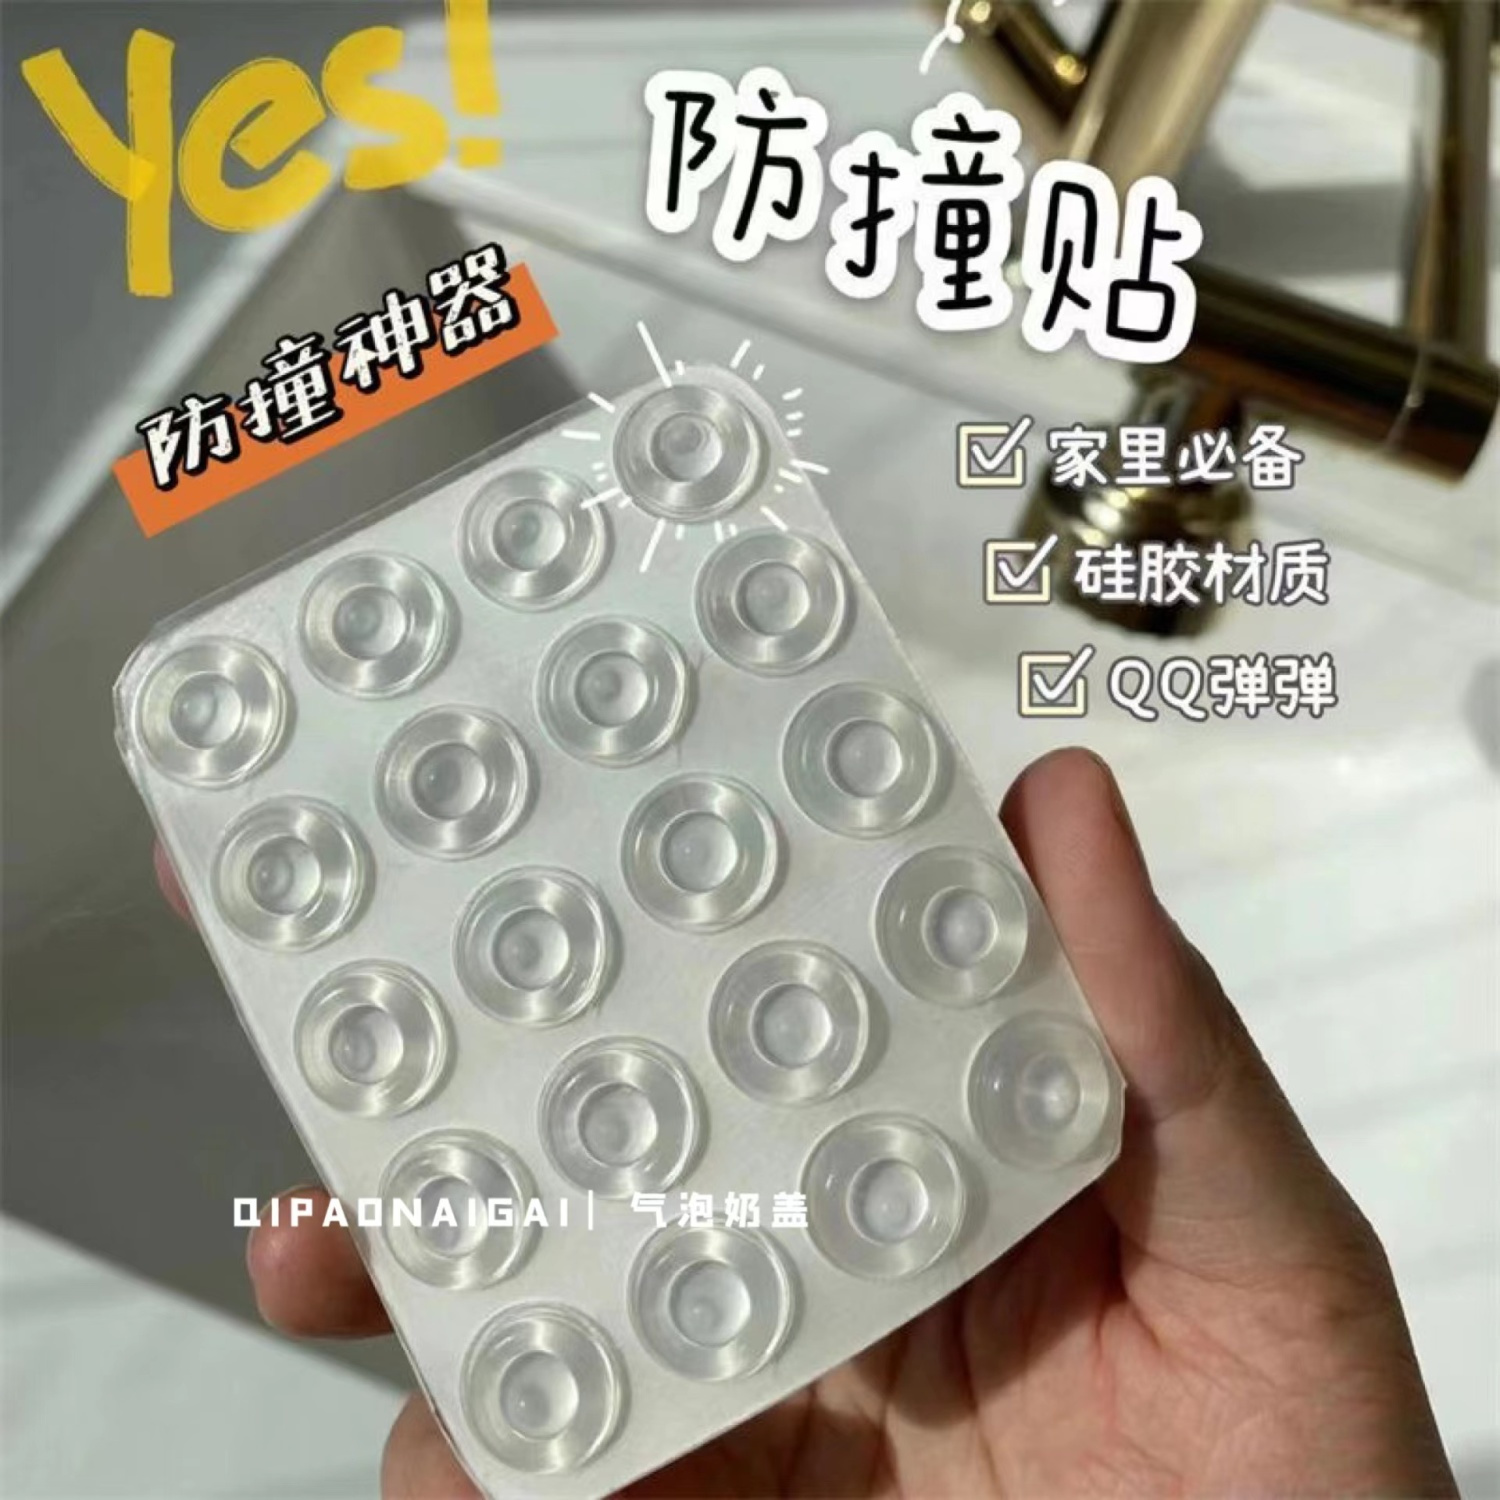 Door Handle Anti-Collision Particles Silica Gel Pad Furniture Silent Noise Reduction Non-Slip Self-Adhesive and Transparent Cushion Paste Wall Screen Protector